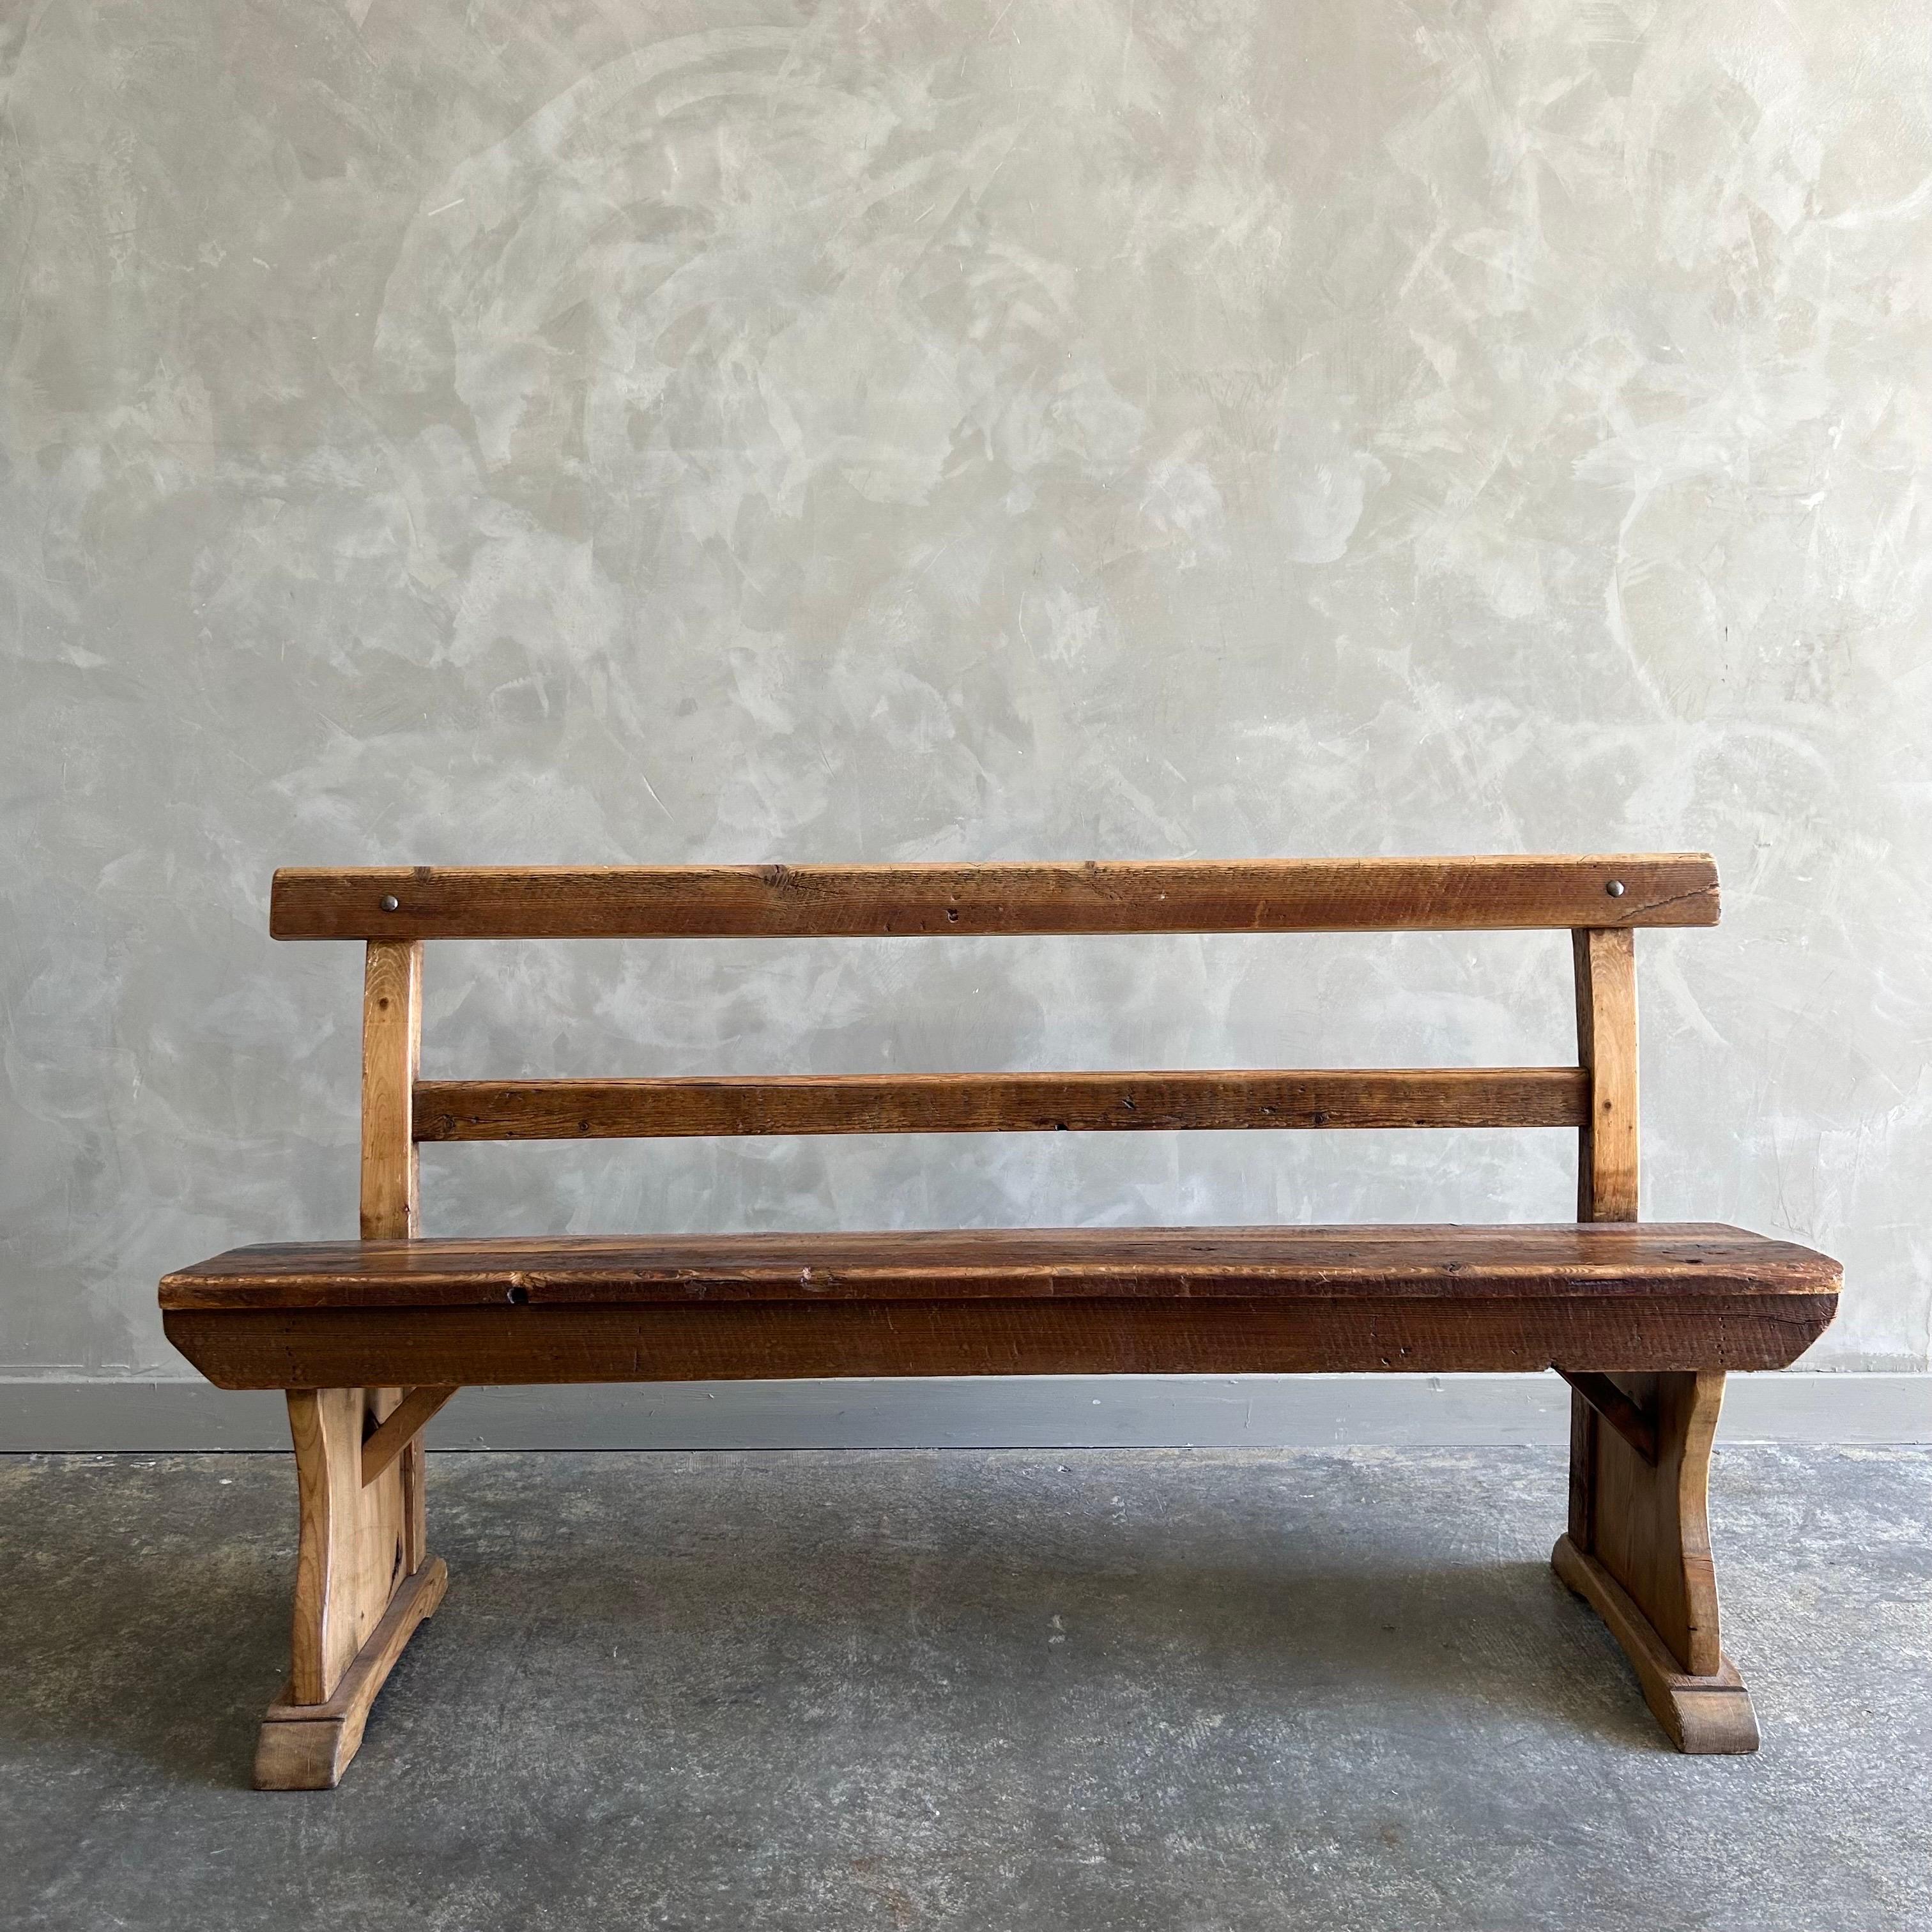 Antique pine settle bench 
Size 59”w x 19”d x 30”h 
Solid and sturdy, great for an entry or any room. Solid pine in a medium brown stain, original finish.
Seat Height : 17”. 
Seat D: 11”